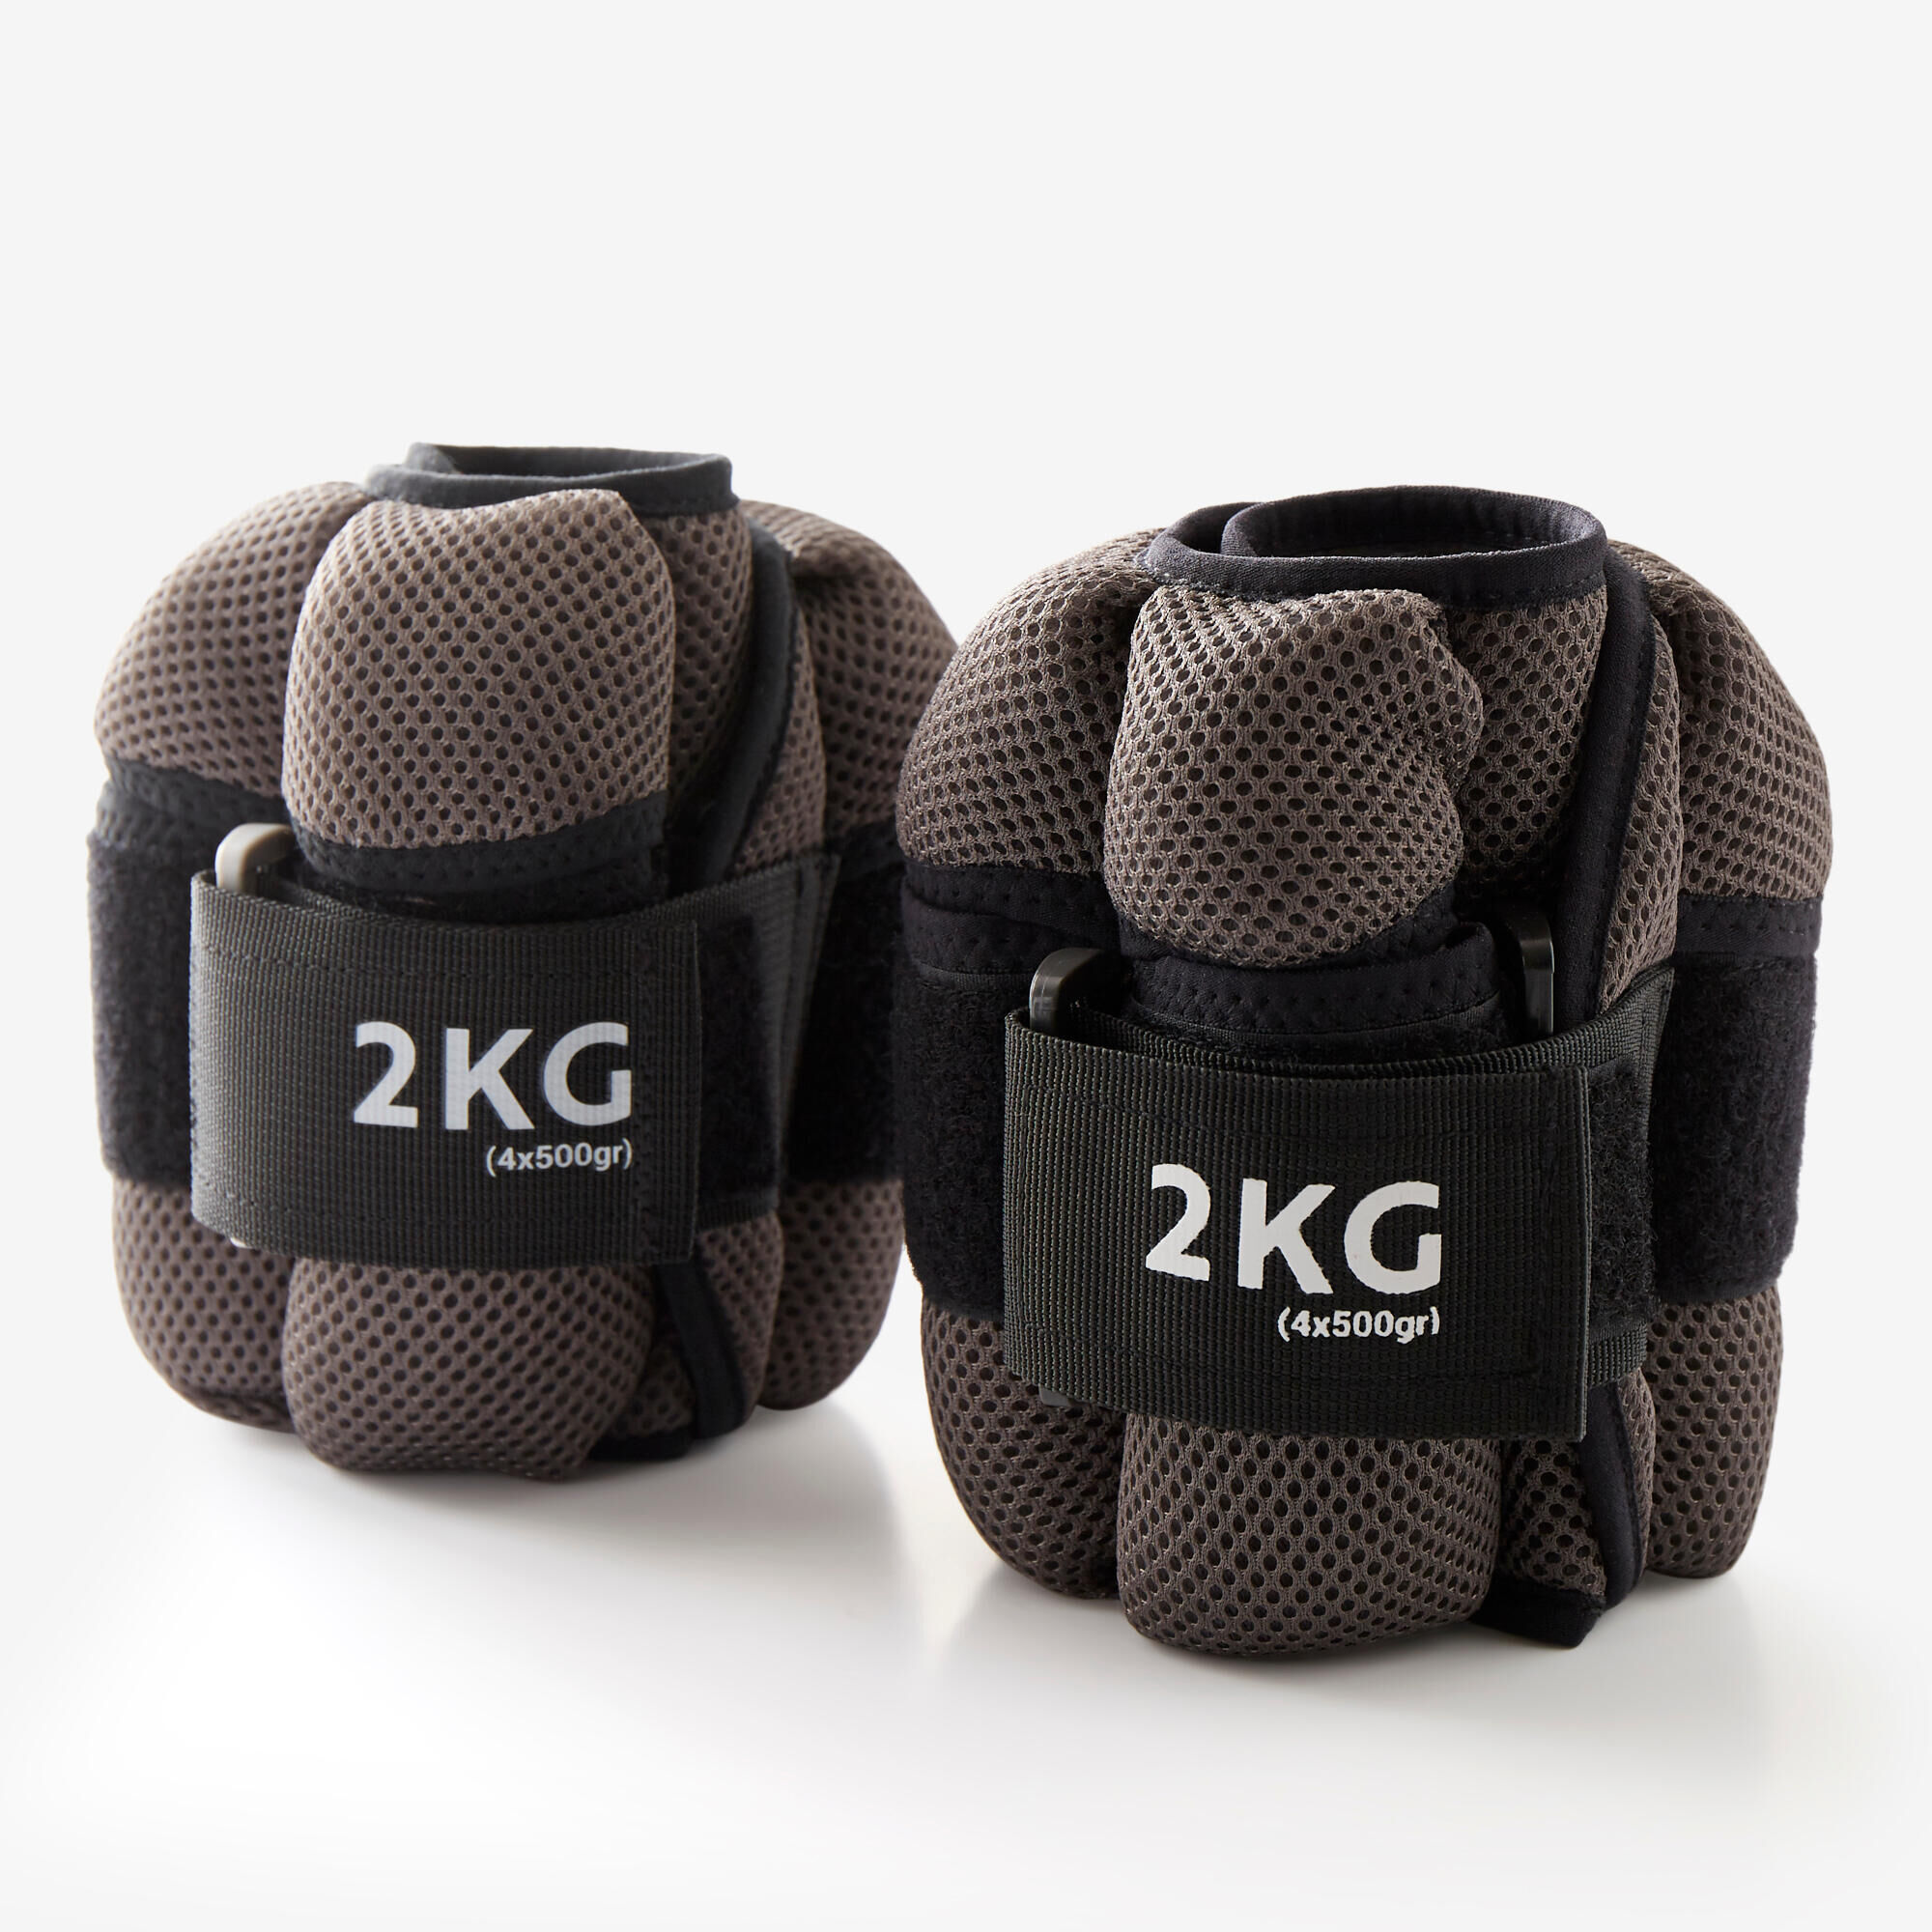 DOMYOS 2 kg Adjustable Wrist / Ankle Weights Twin-Pack - Grey